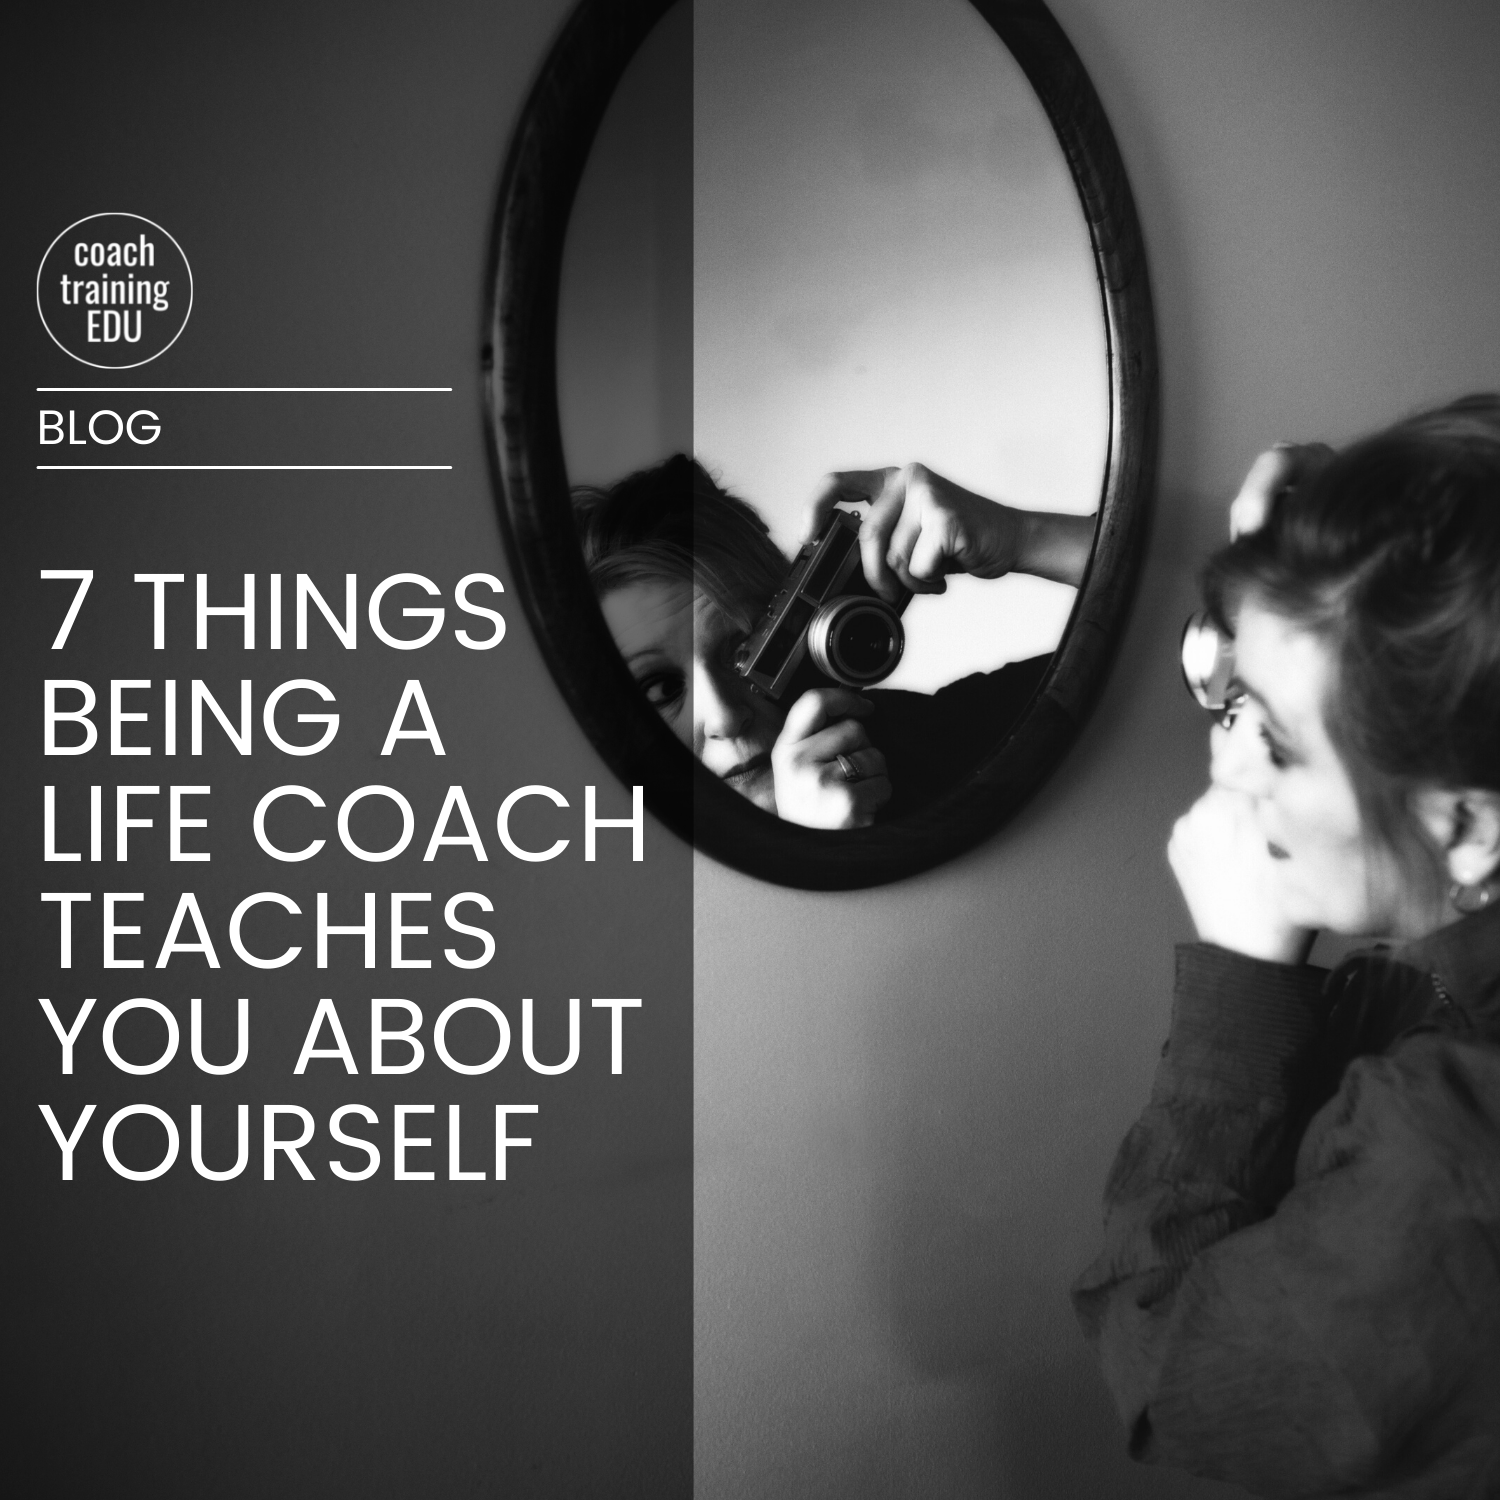 7 Things Being a Life Coach Teaches You About Yourself